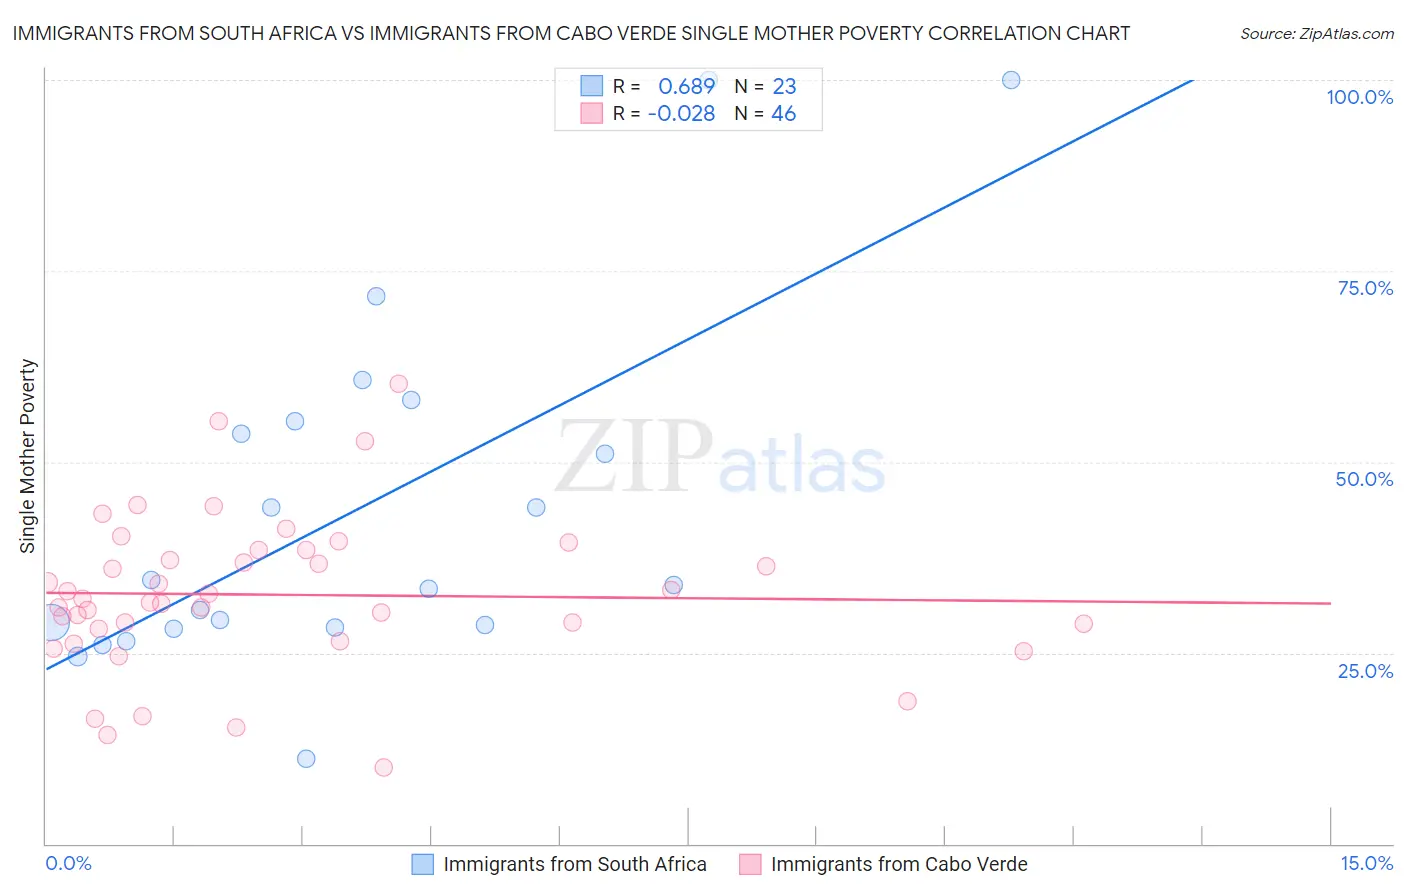 Immigrants from South Africa vs Immigrants from Cabo Verde Single Mother Poverty